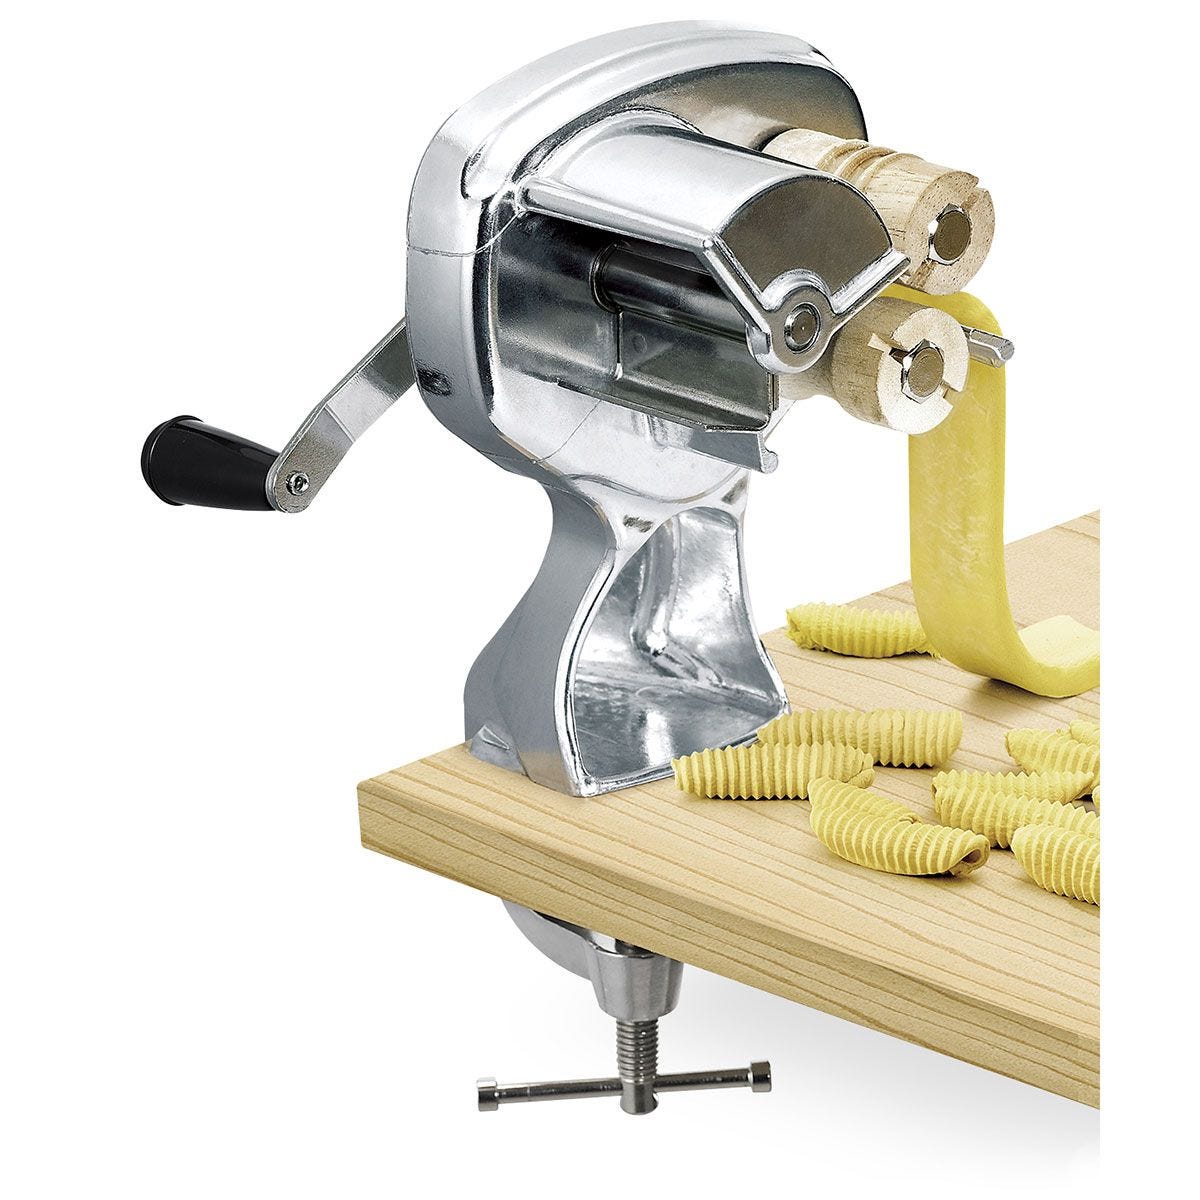 BakeDeco Cavatelli Maker with Nonstick Coating and Wooden Rollers